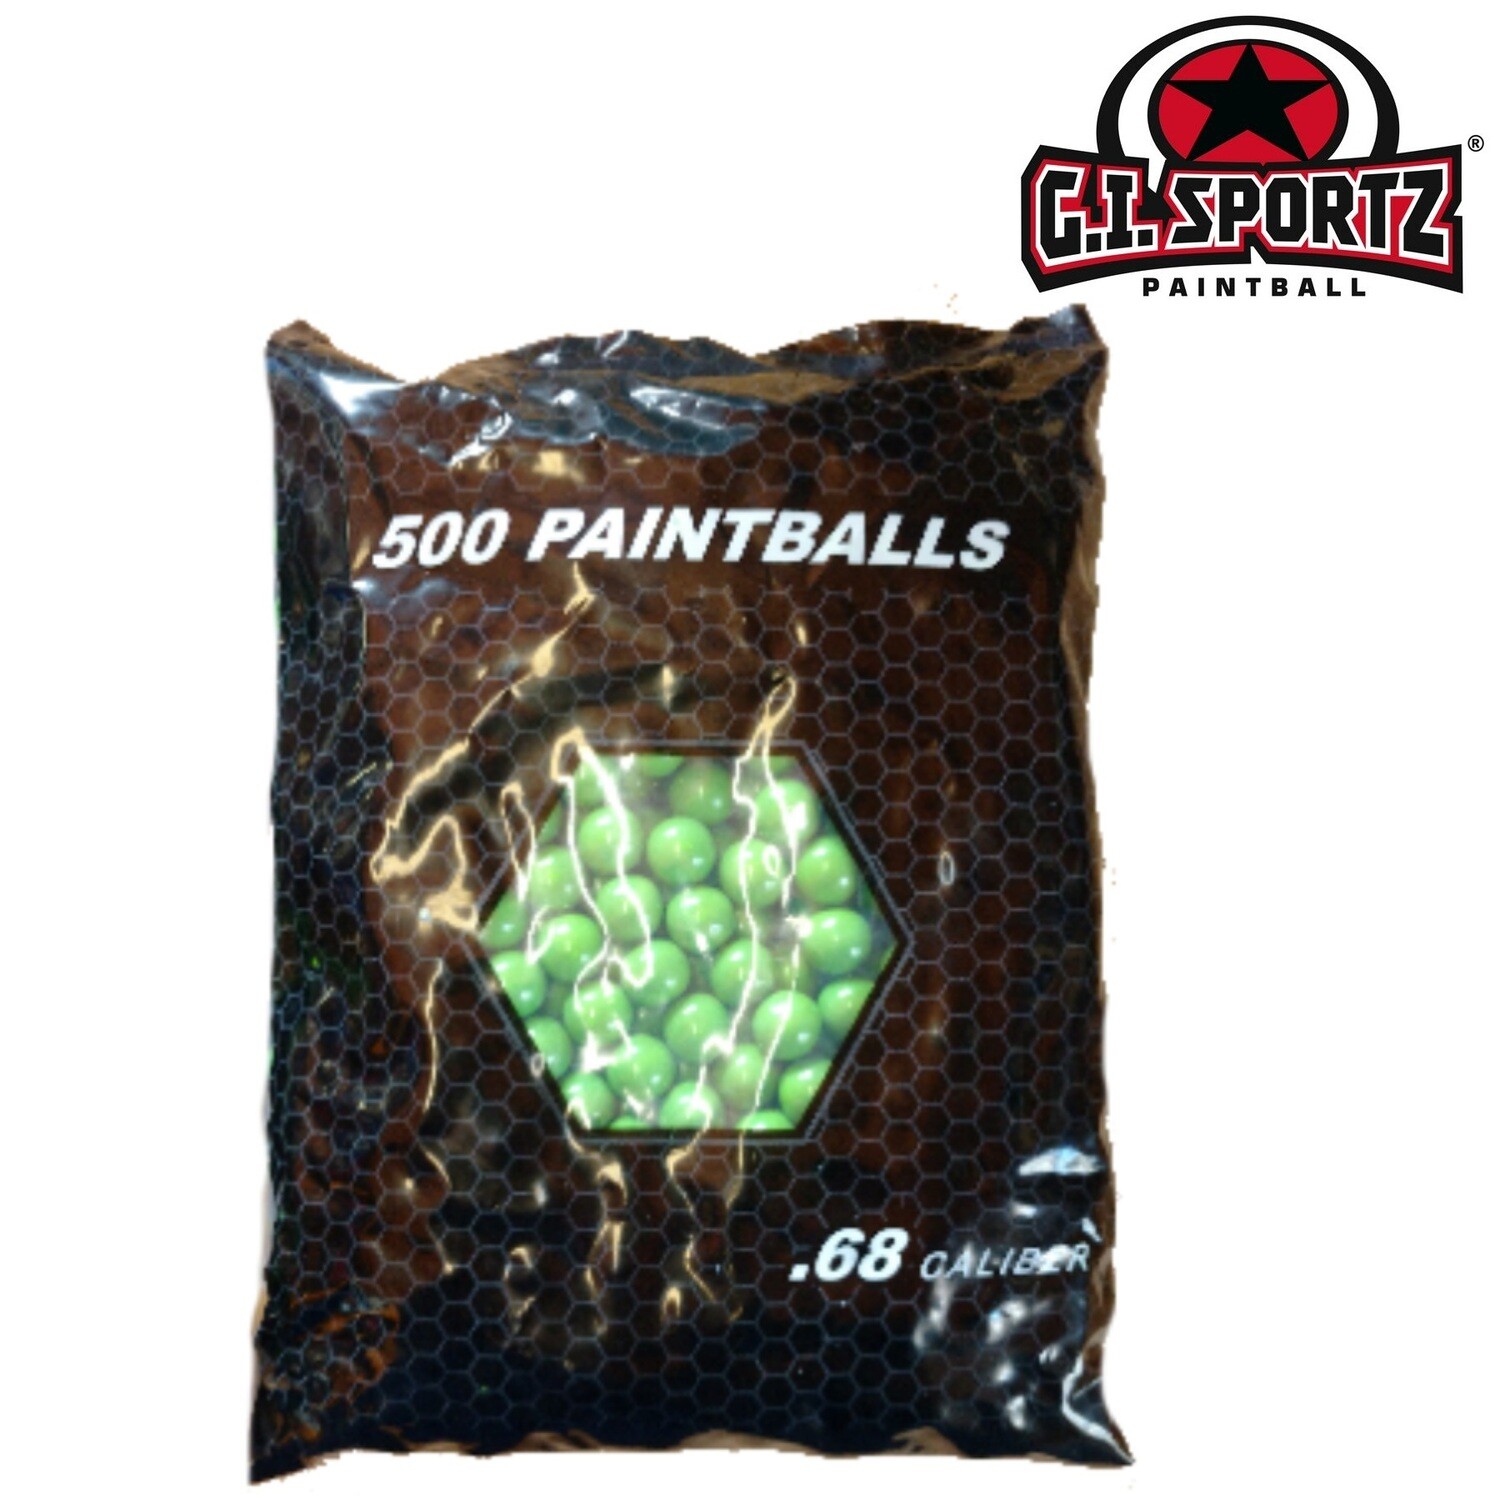 G.I. Sportz 1-Star Paintballs - 500 Rounds - .68 caliber - Color May Vary